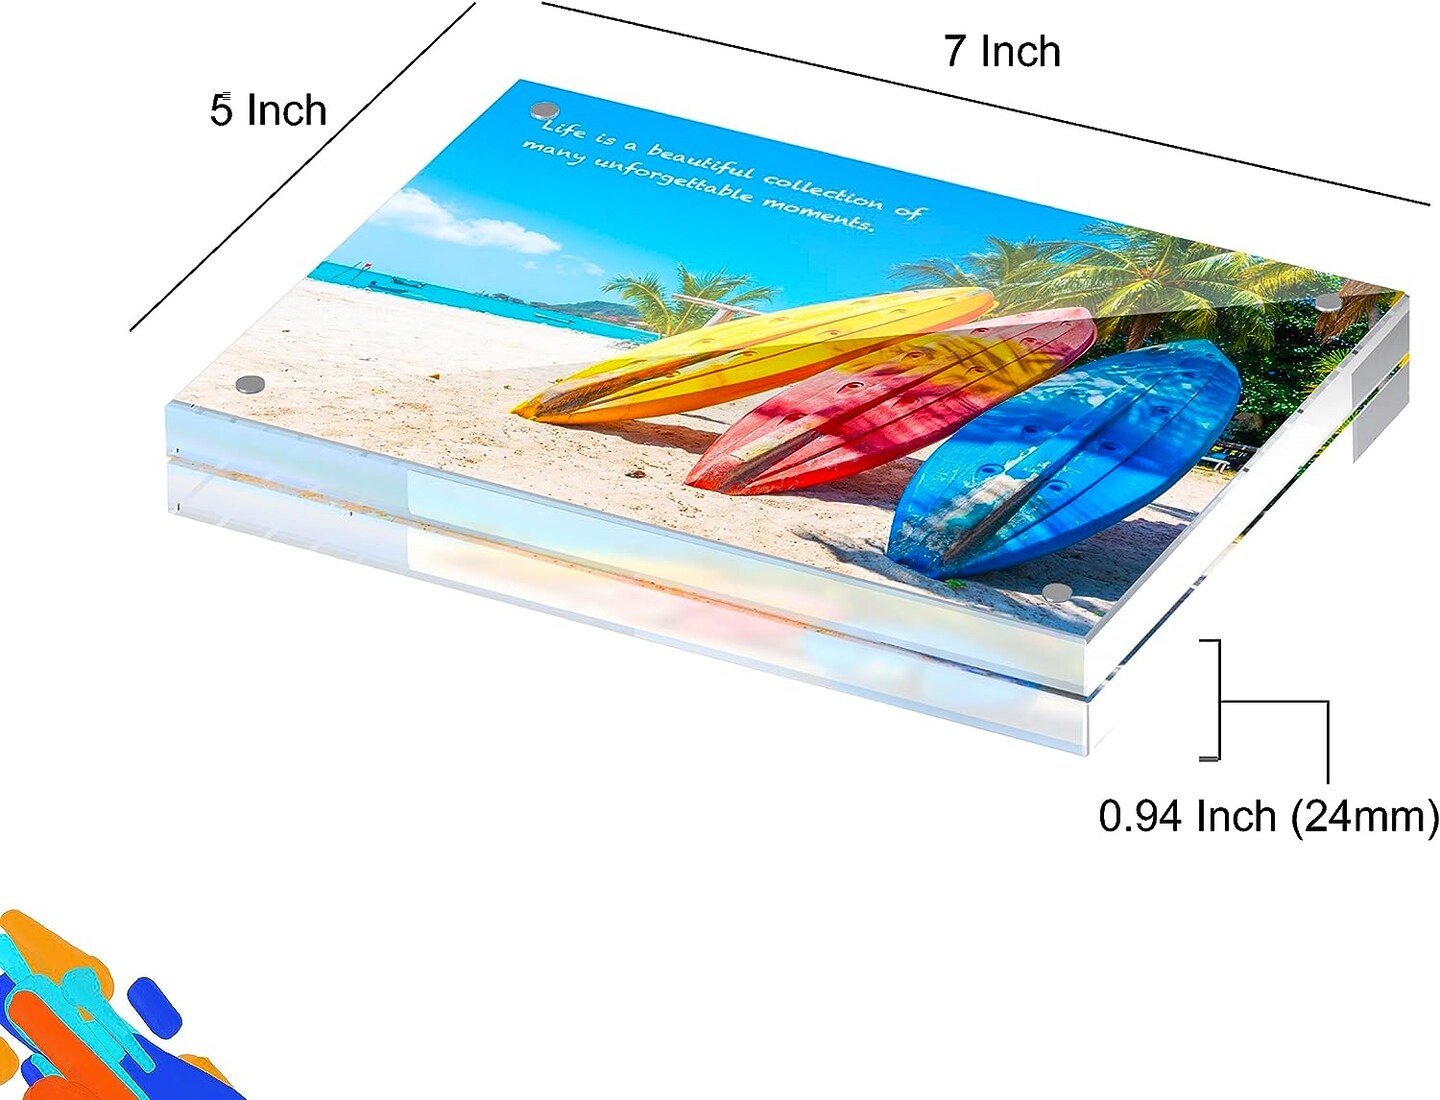 Danoni Picture Frames Acrylic 24mm Thickness Durable Photo Frame Double Sided Clear Display with FREE Microfiber Cloth